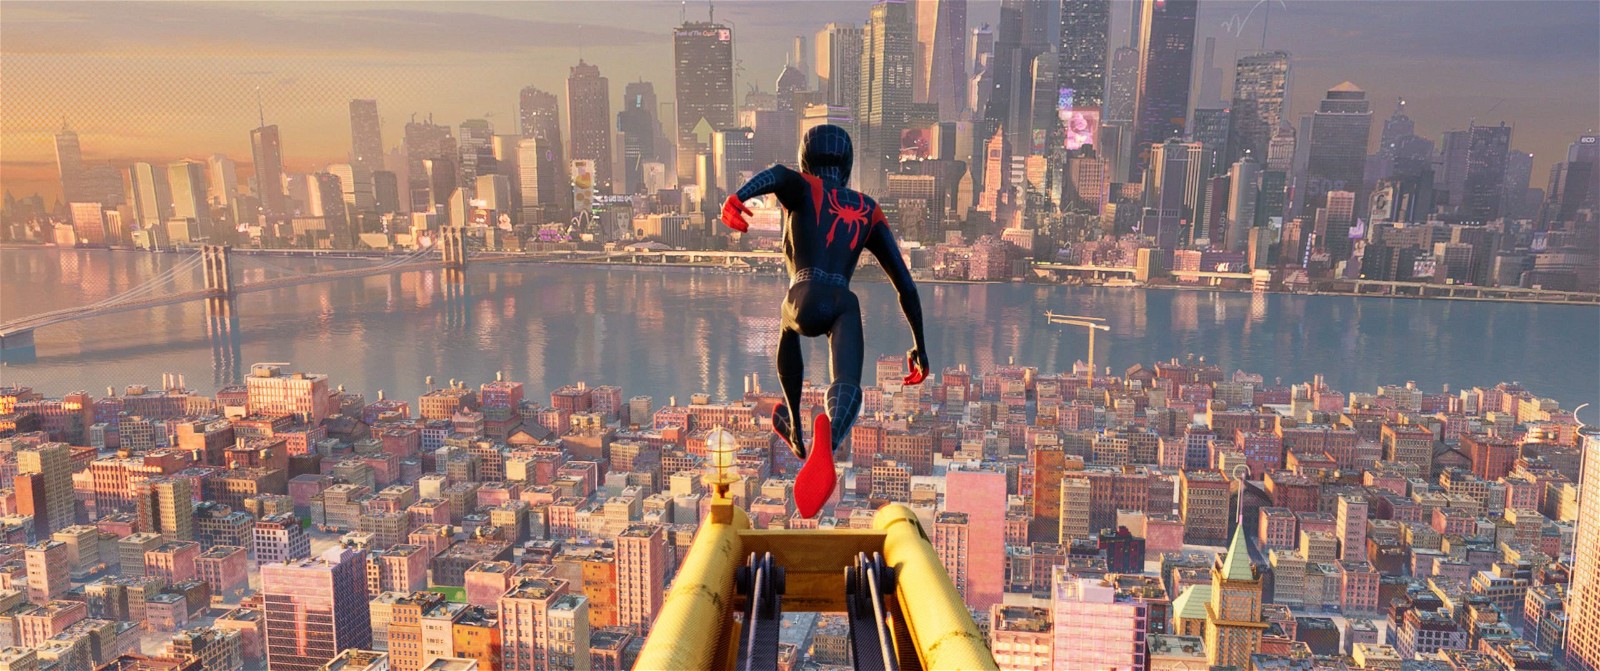 Miles Morales in Spider-Man: nto the Spider-Verse